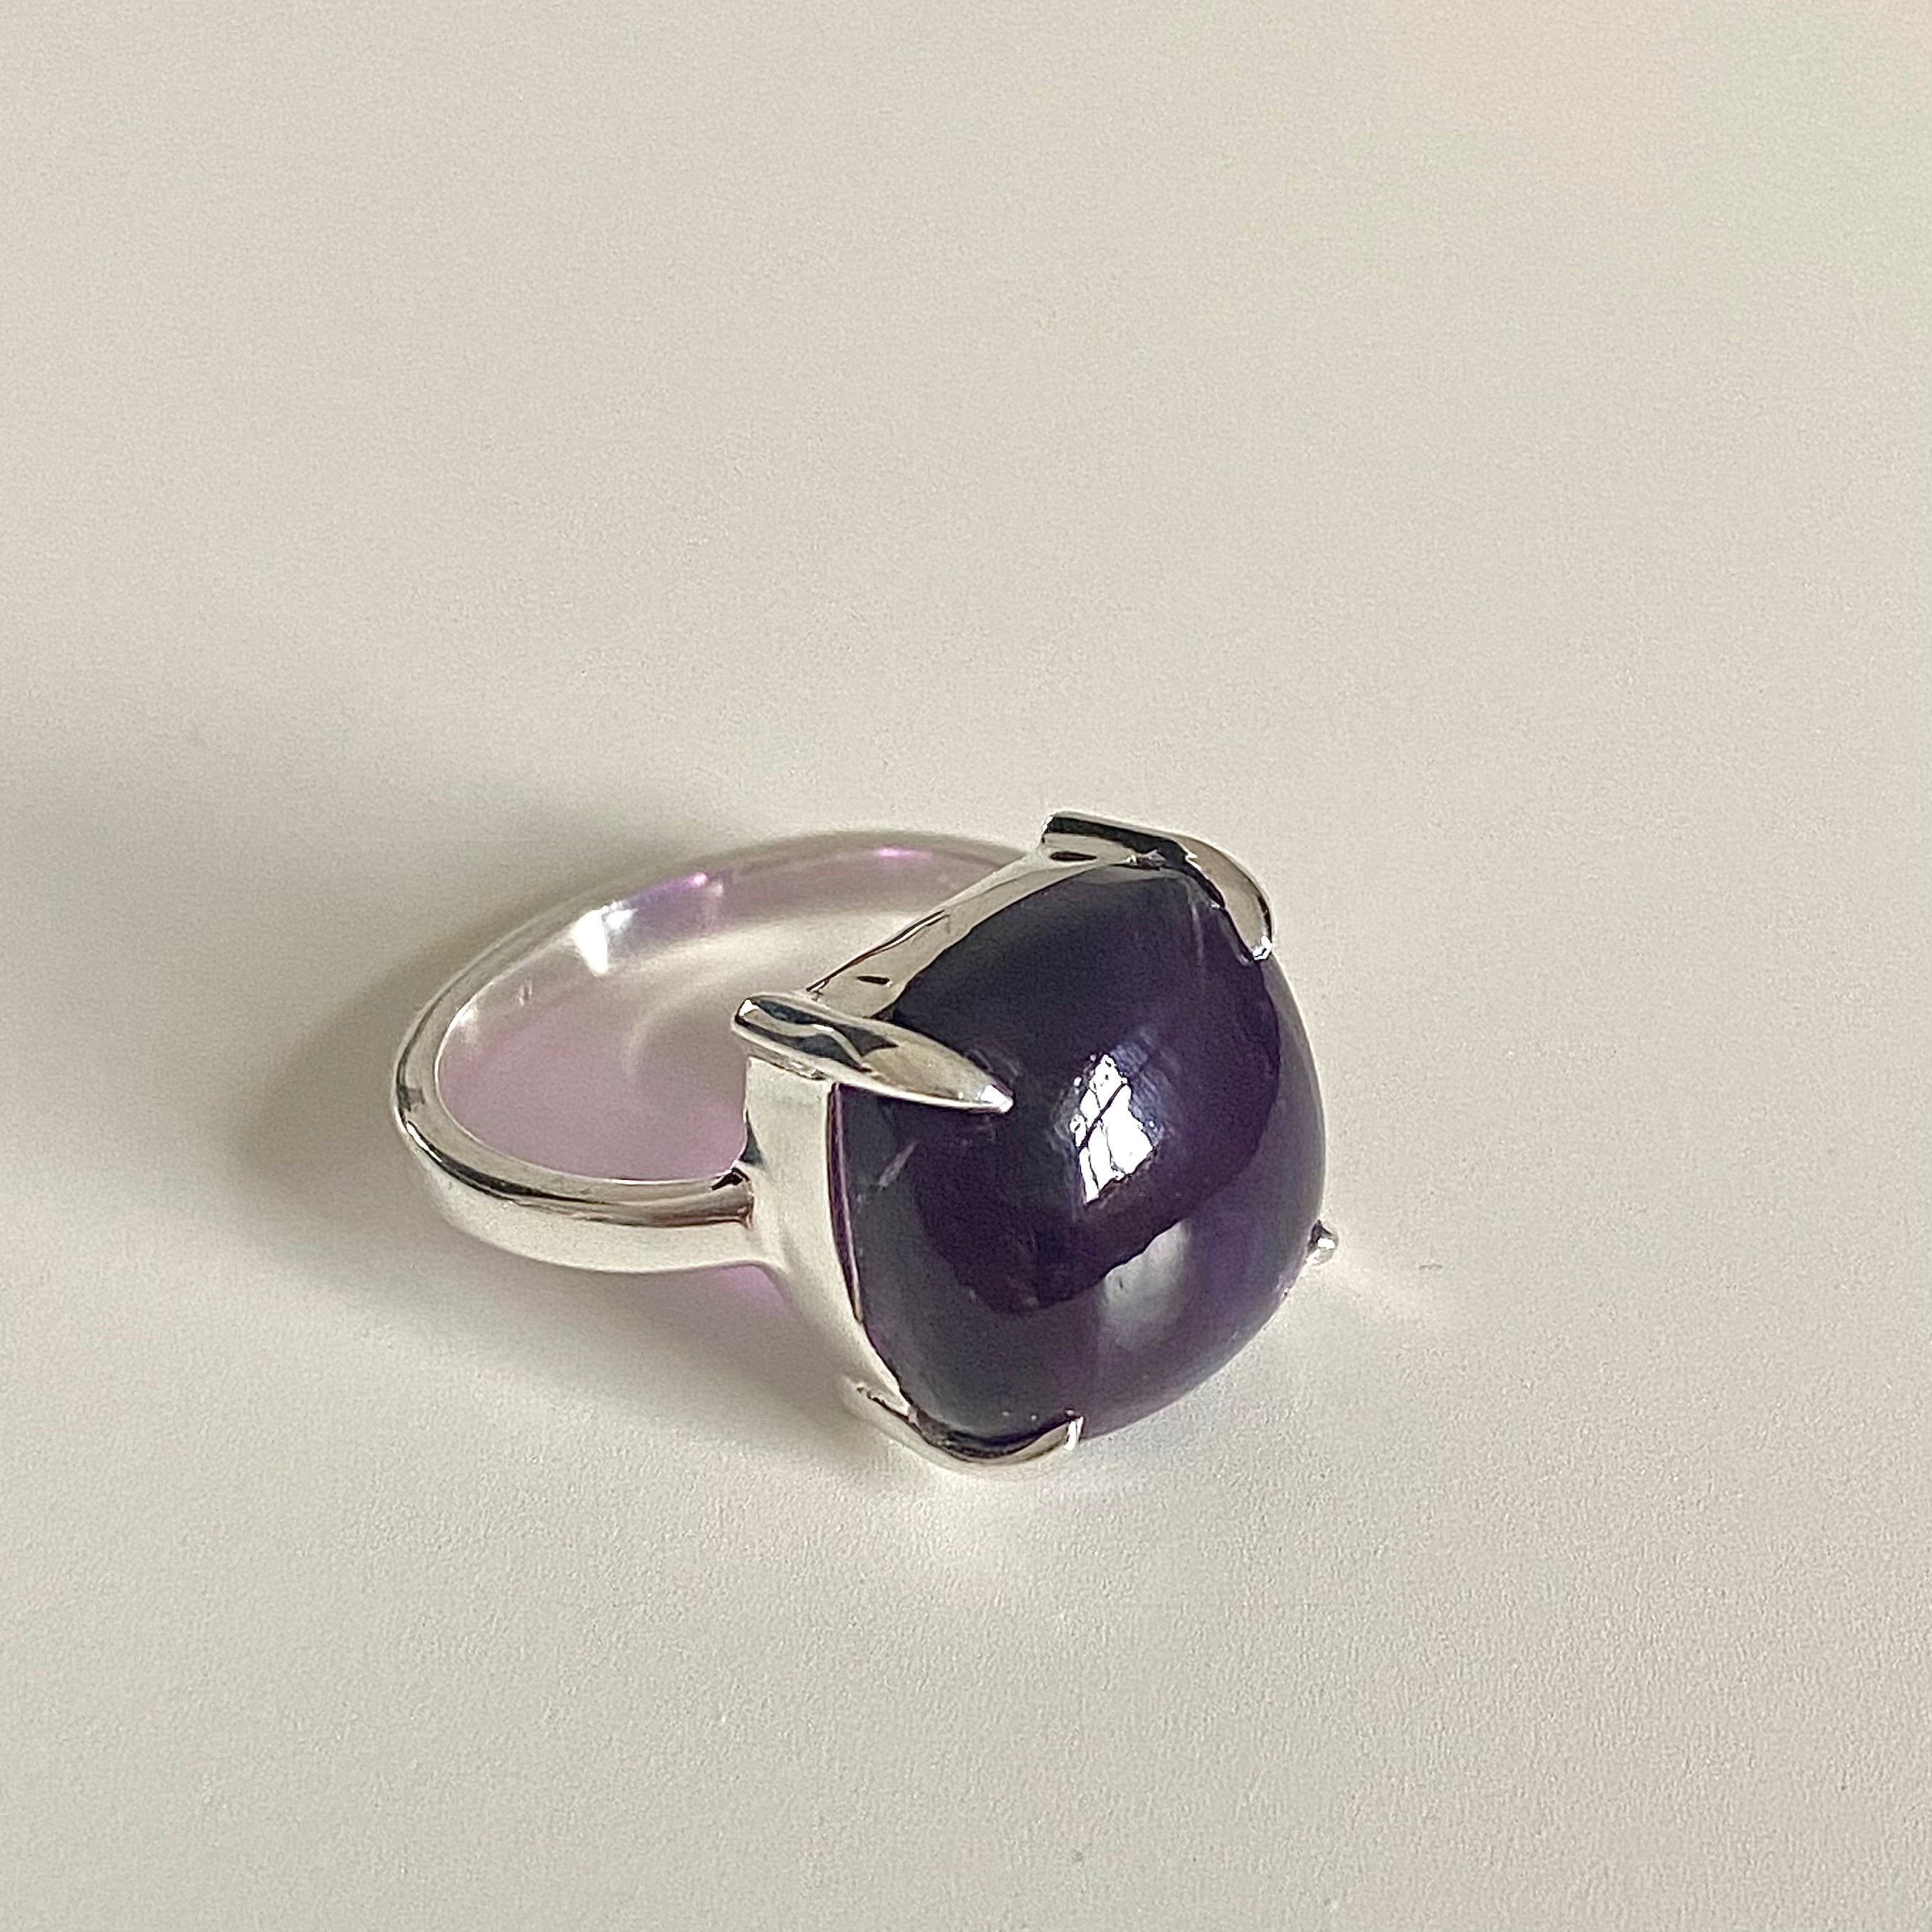 Square Cabochon Amethyst Ring in Sterling Silver